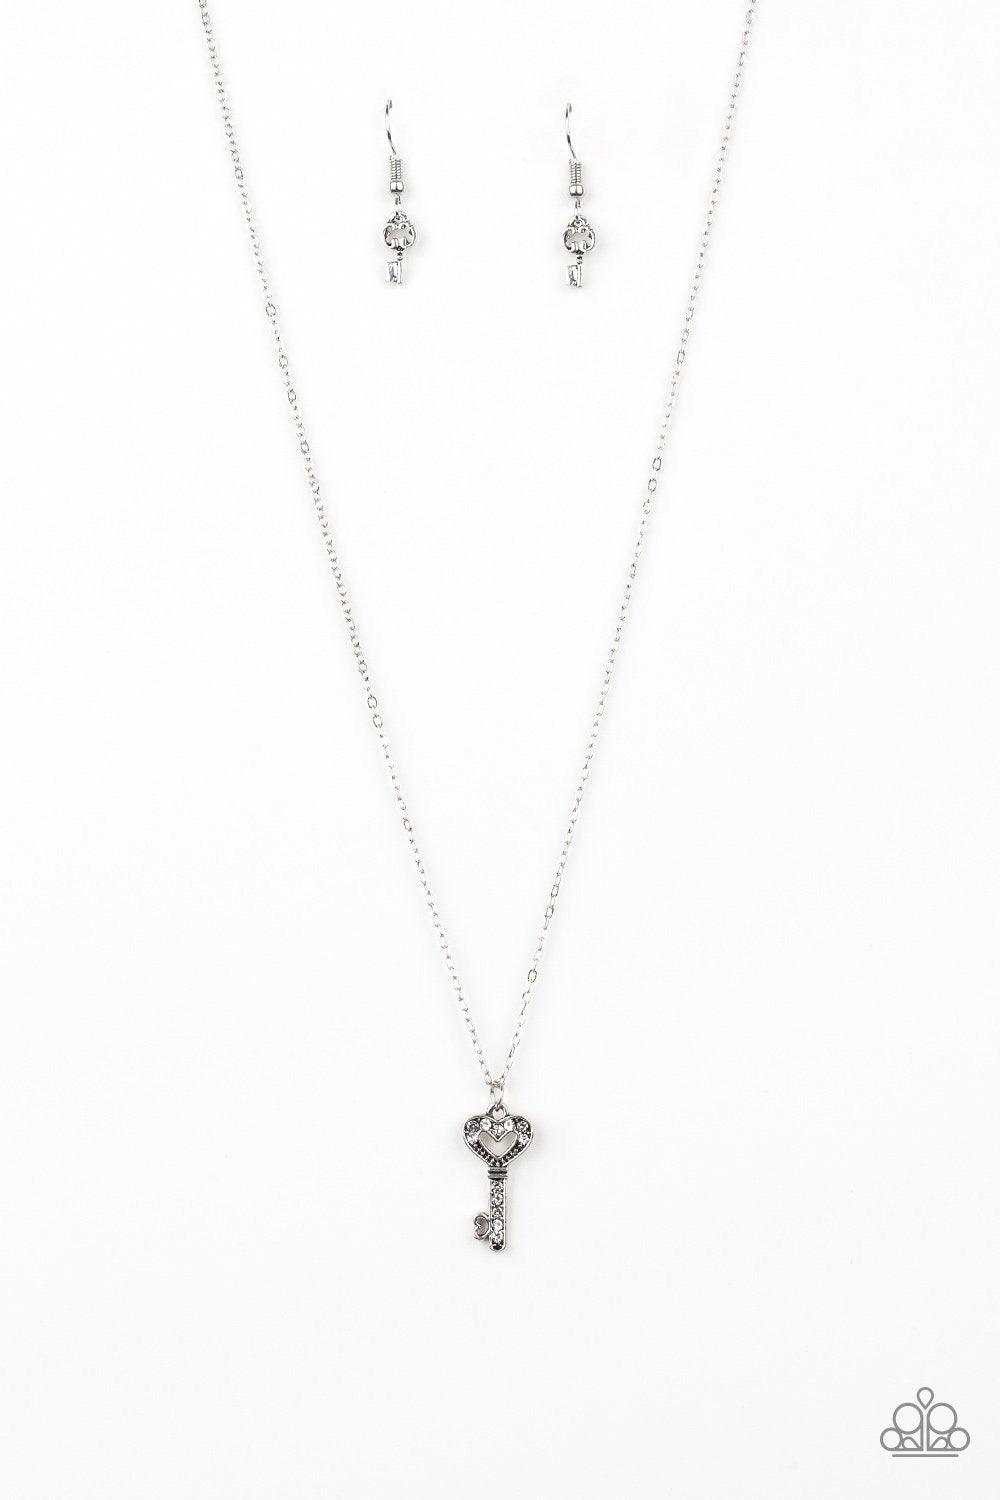 Paparazzi Accessories Lock Up Your Valuables - White Dotted in glassy white rhinestones, a dainty silver key pendant swings below the collar for a charming look. Features an adjustable clasp closure. Jewelry